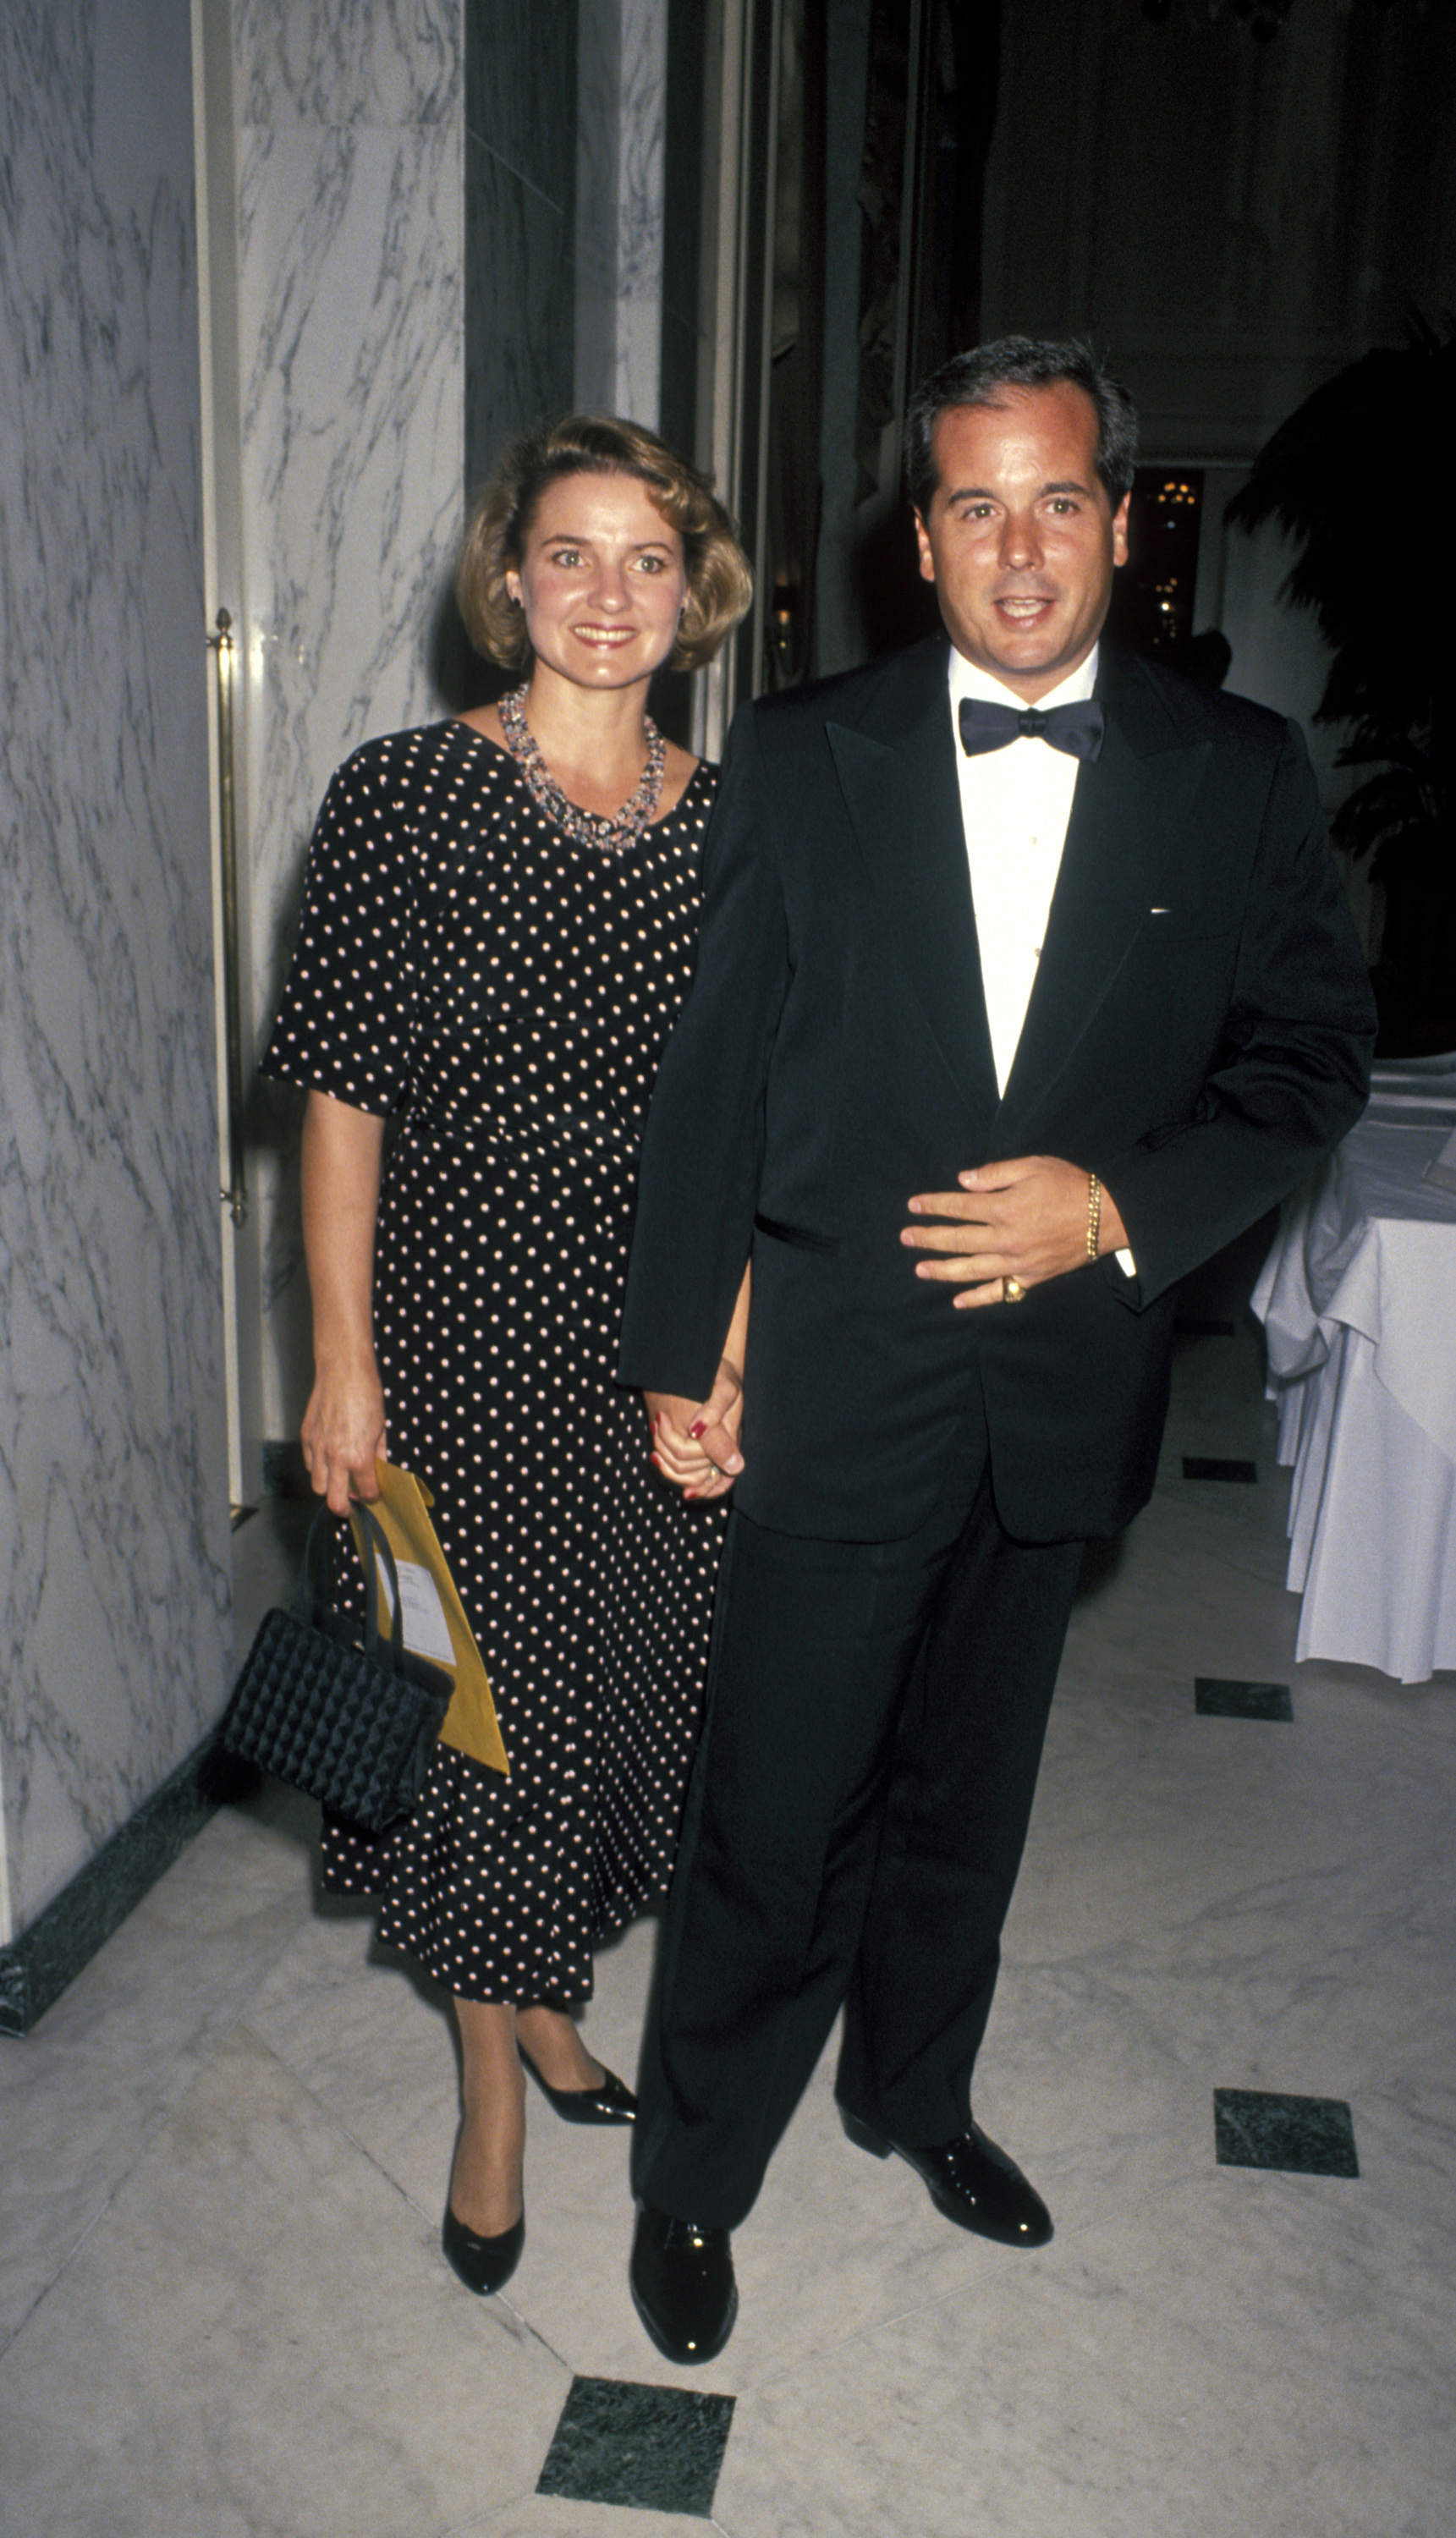 Amy Bergiel Arnaz and Desi Arnaz Jr. during the Television Academy Hall of Fame Awards at Beverly Wilshire Hotel in Beverly Hills, California on September 23, 1991 | Source: Getty Images